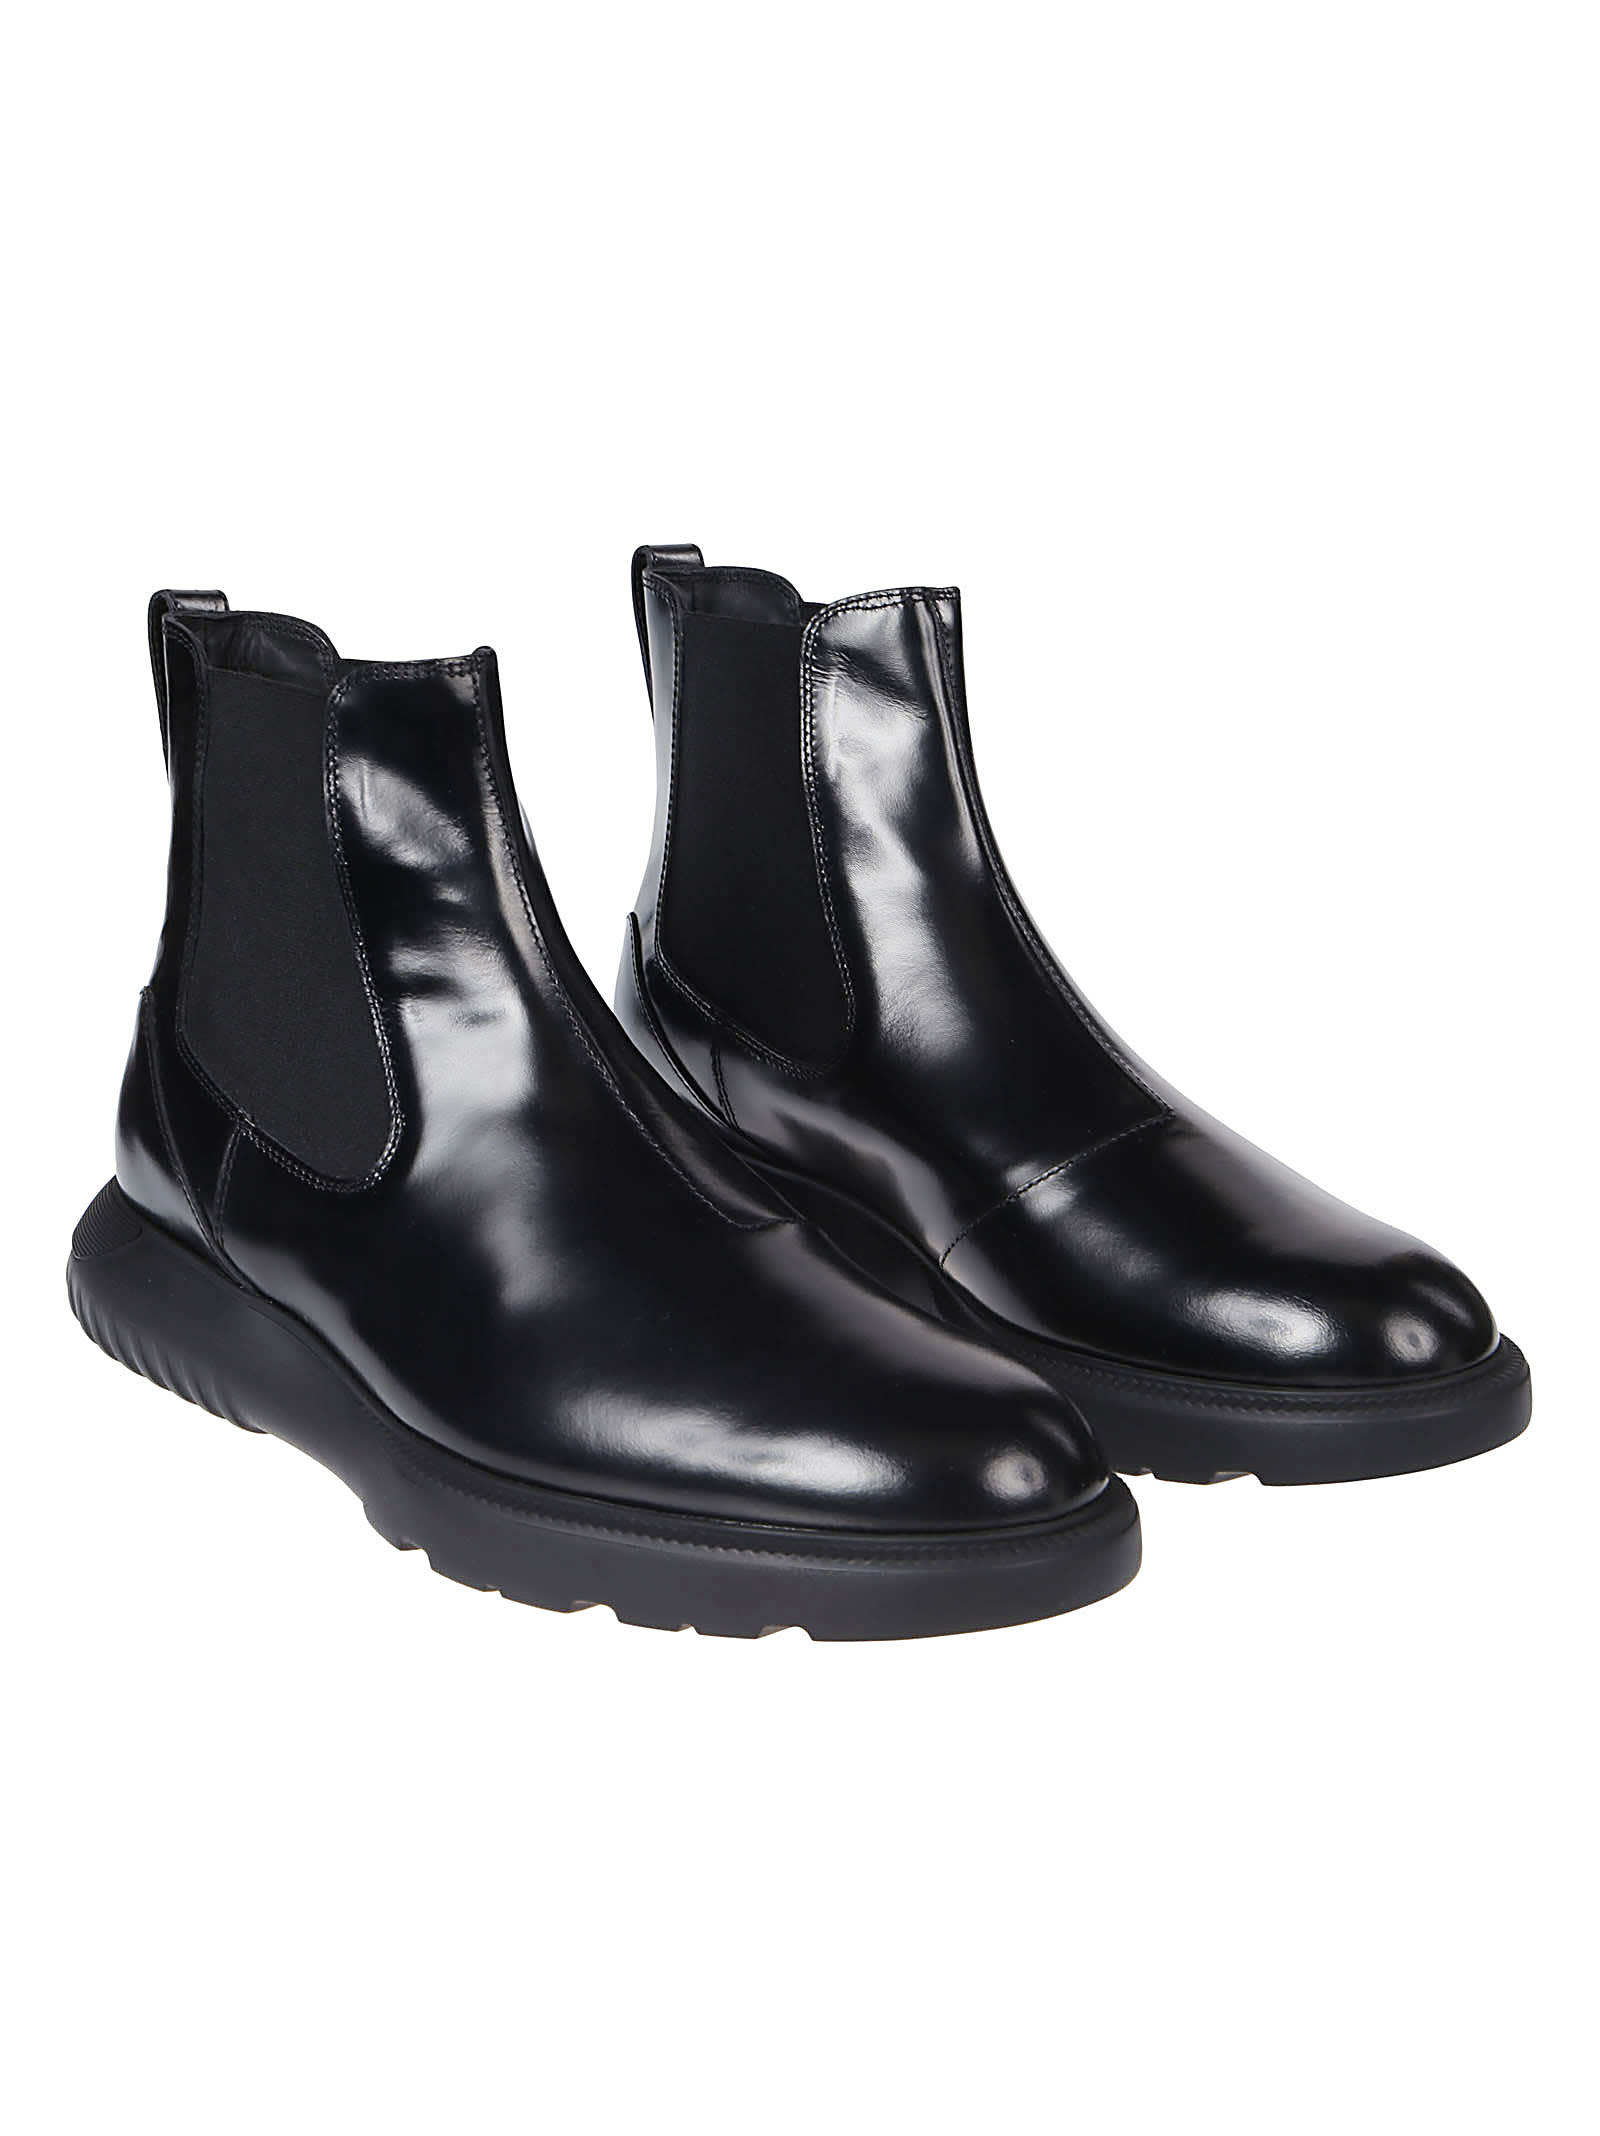 Shop Hogan H600 Chelsea Ankle Boots In Nero